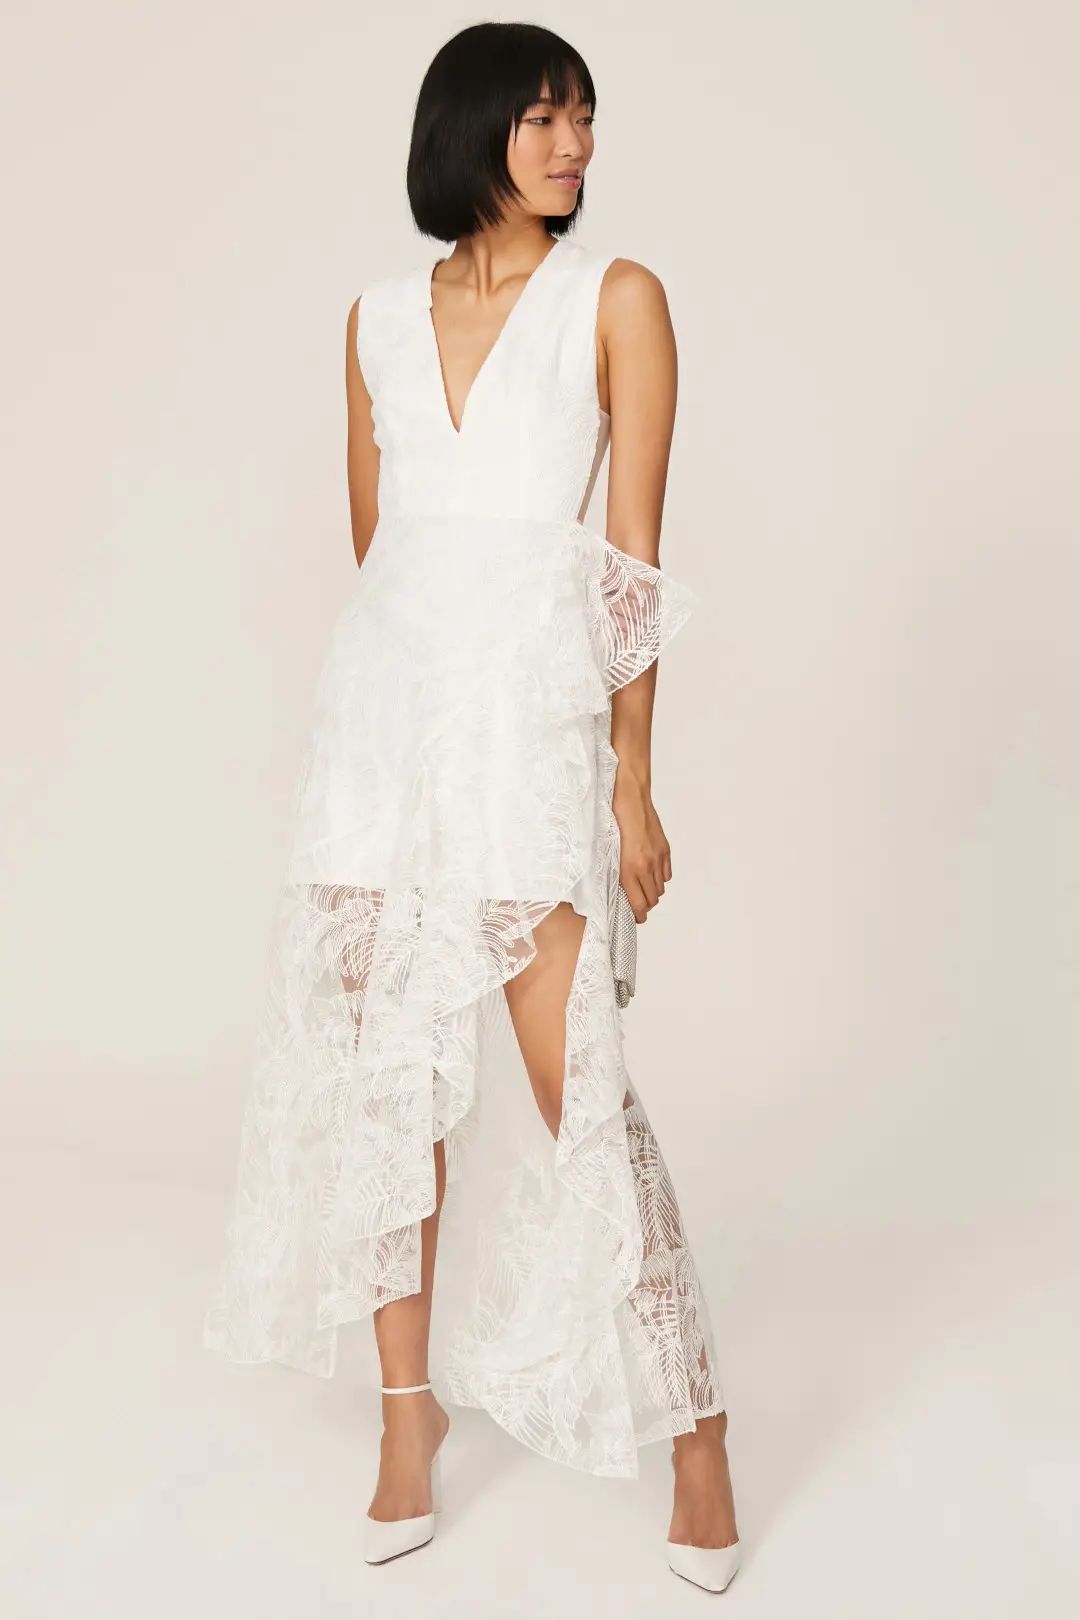 ONE33SOCIAL Embroidered Lace Dress | Rent the Runway